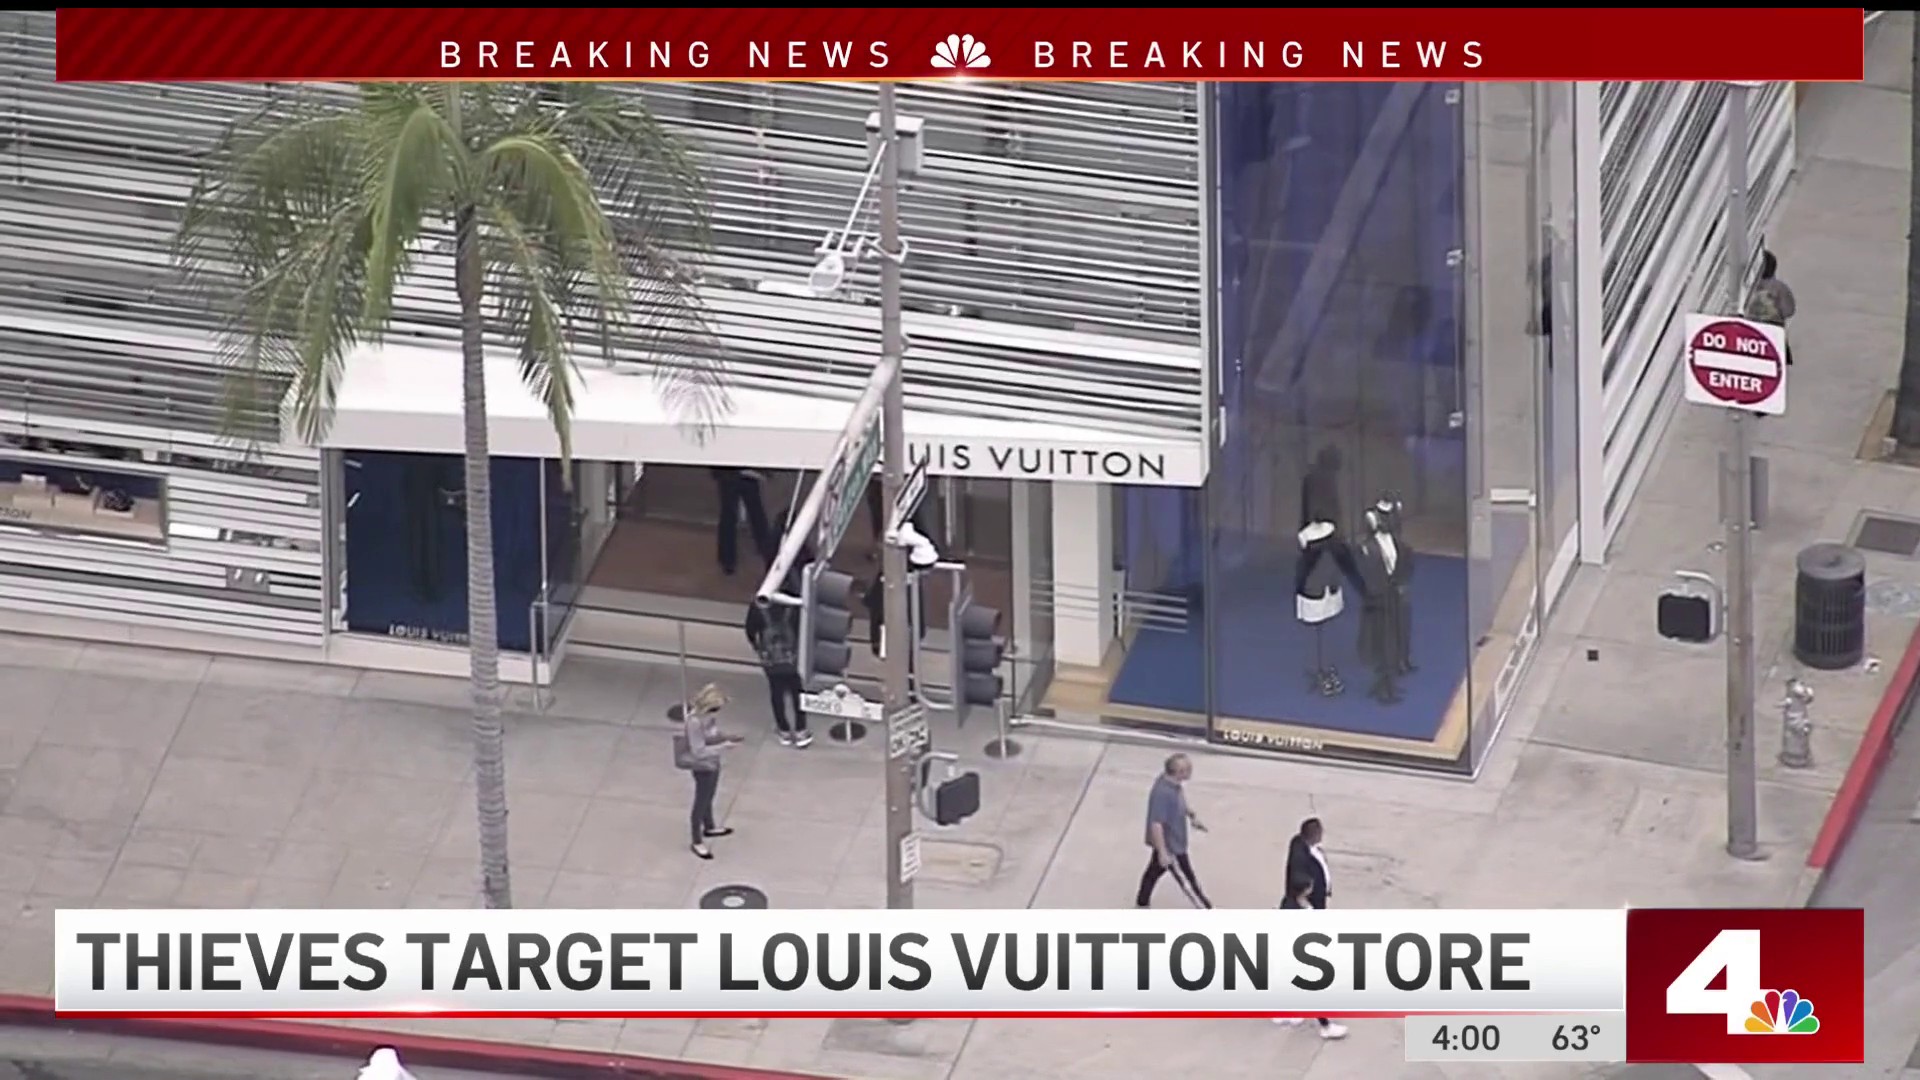 Louis Vuitton empire heir burgled with thieves stealing 'millions